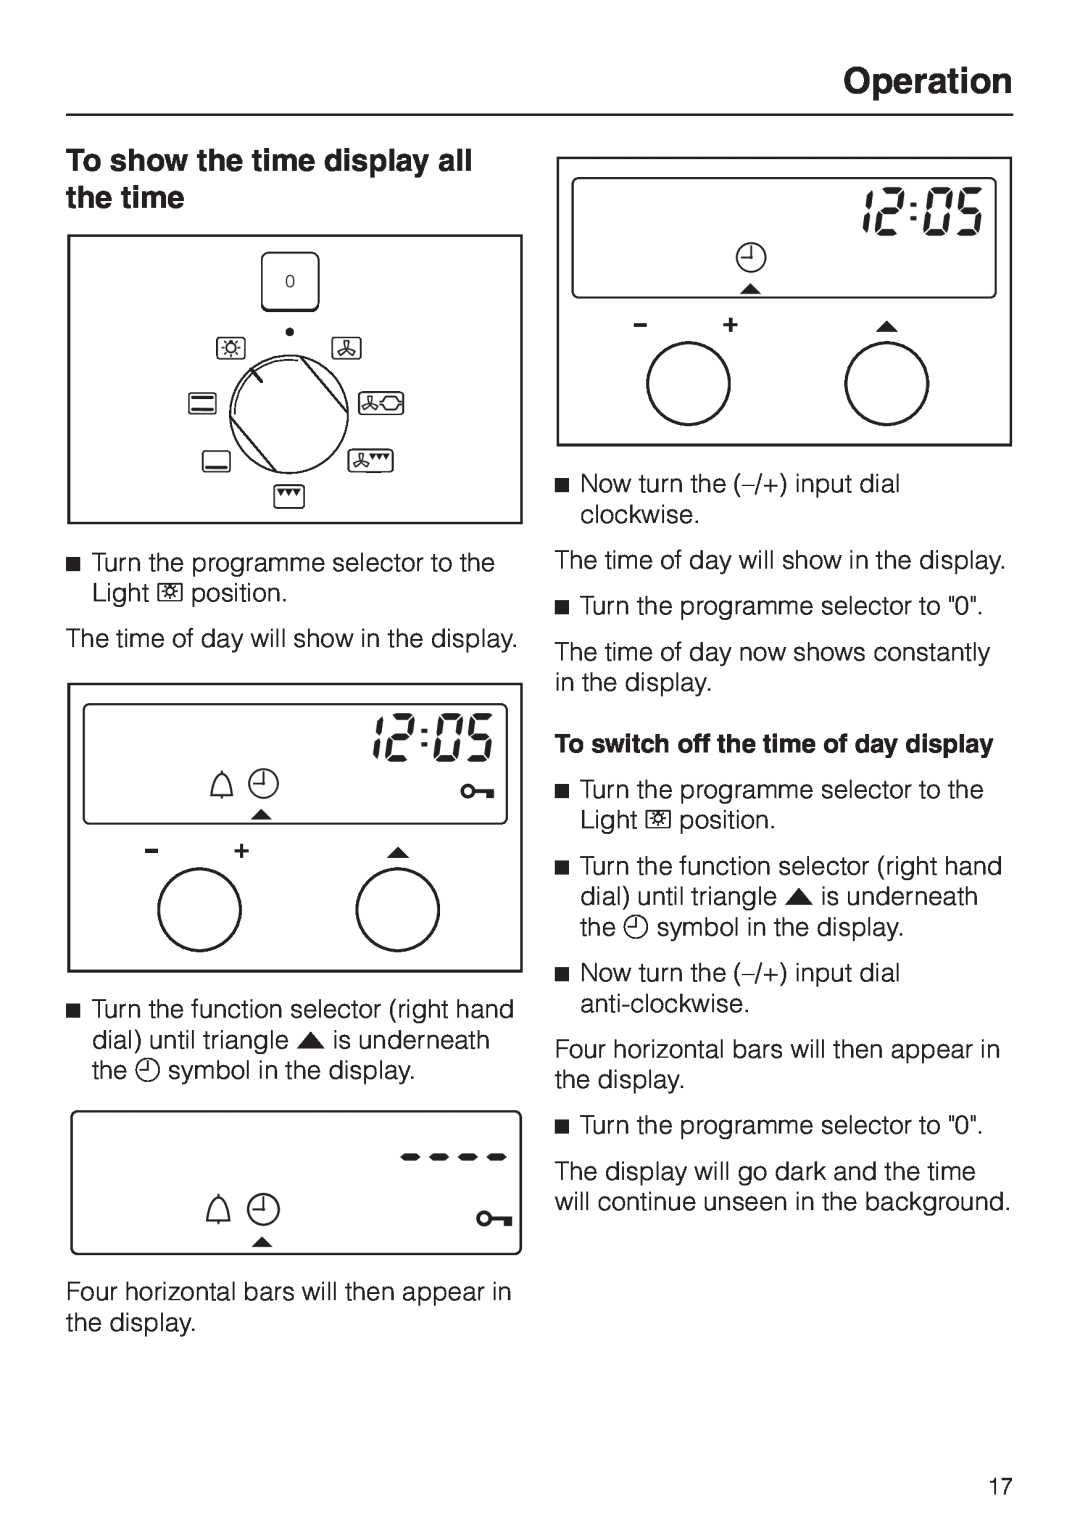 Miele H334B, H 344-2 B manual To show the time display all the time, To switch off the time of day display, Operation 